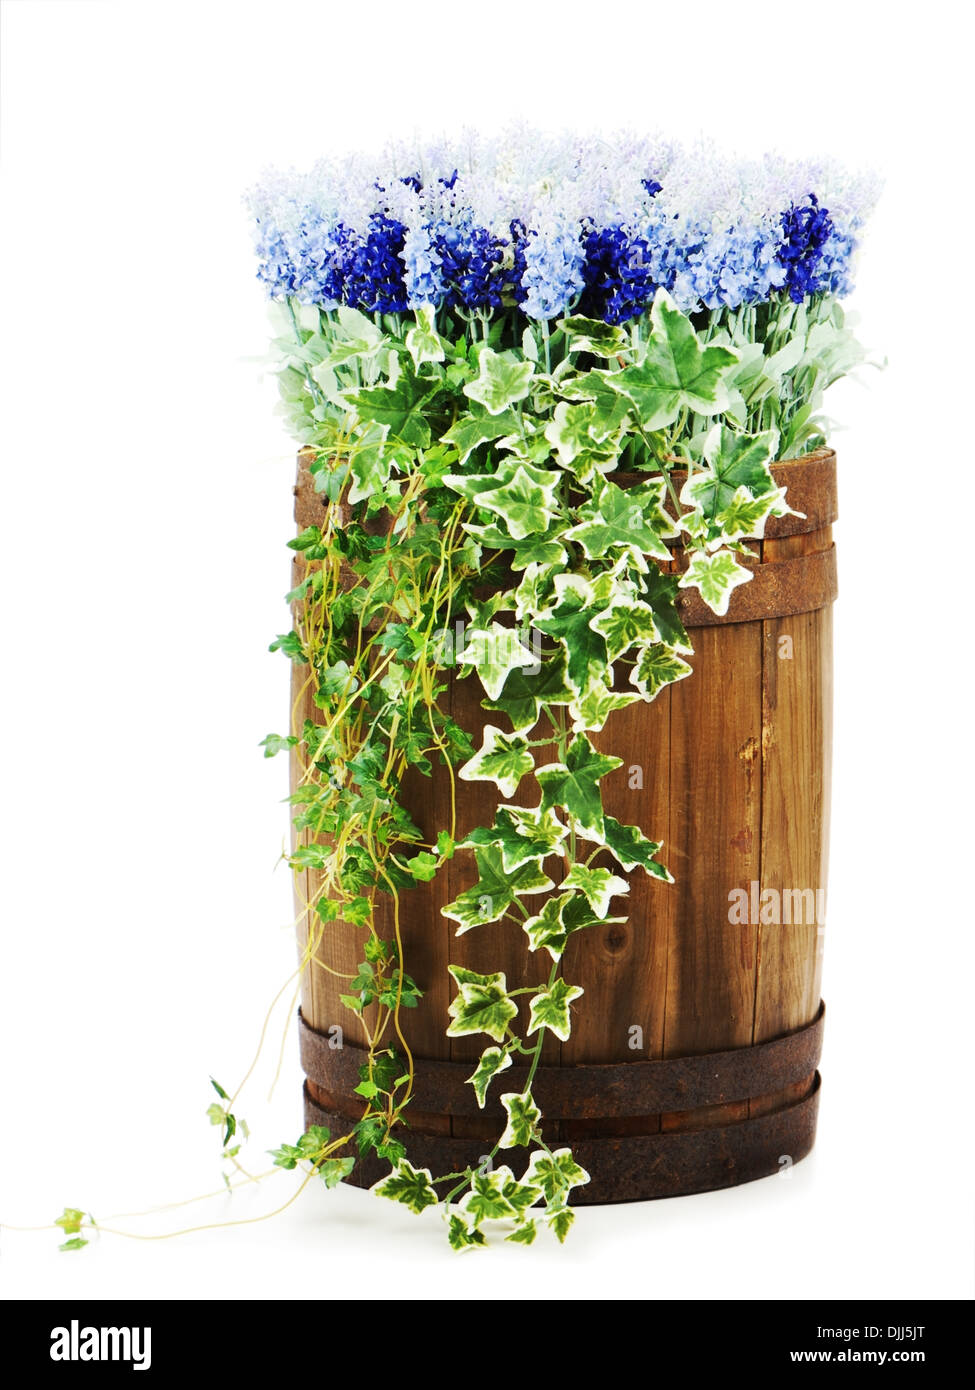 Composition of artificial flowers in old wooden barrel isolated on white background. Closeup. Stock Photo